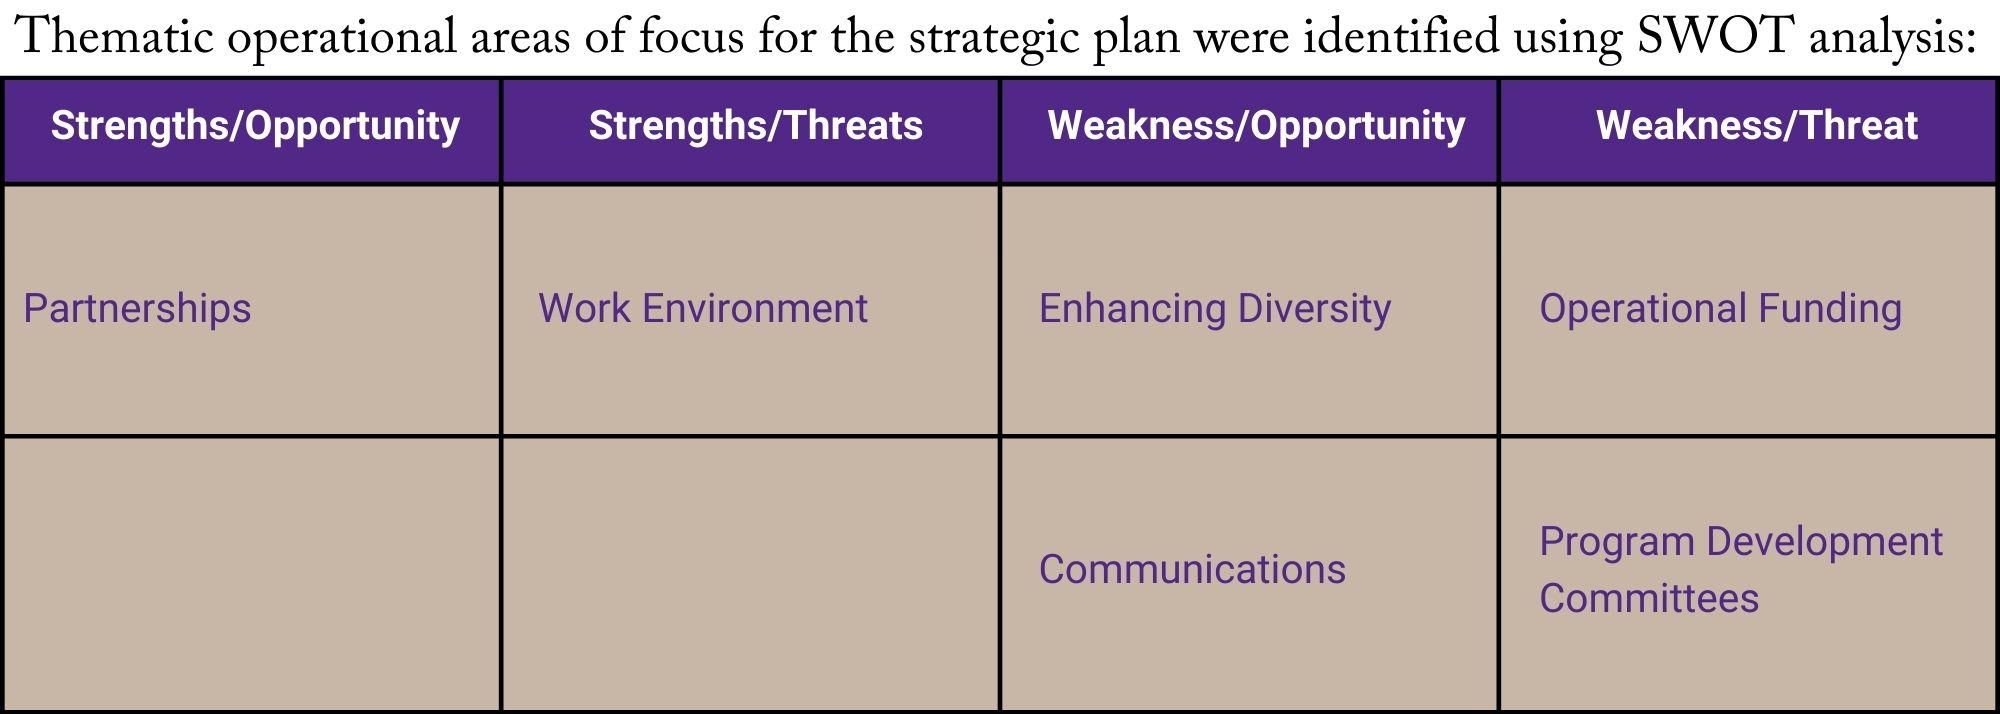                    Thematic operational areas of focus for the strategic plan were identified using SWOT analysis: Strengths/Opportunity Strengths/Threats Weakness/Opportunity Weakness/Threat Partnerships Work Environment Enhancing Diversity Communications Operational Funding Program Development Committees                Thematic operational areas of focus for the strategic plan were identified using SWOT analysis: Strengths/Opportunity Strengths/Threats Weakness/Opportunity Weakness/Threat Partnerships Work Environment Enhancing Diversity Communications Operational Funding Program Development Committees    Thematic operational areas of focus for the strategic plan were identified using SWOT analysis: Strengths/Opportunity Strengths/Threats Weakness/Opportunity Weakness/Threat Partnerships Work Environment Enhancing Diversity Communications Operational Funding Program Development Committees